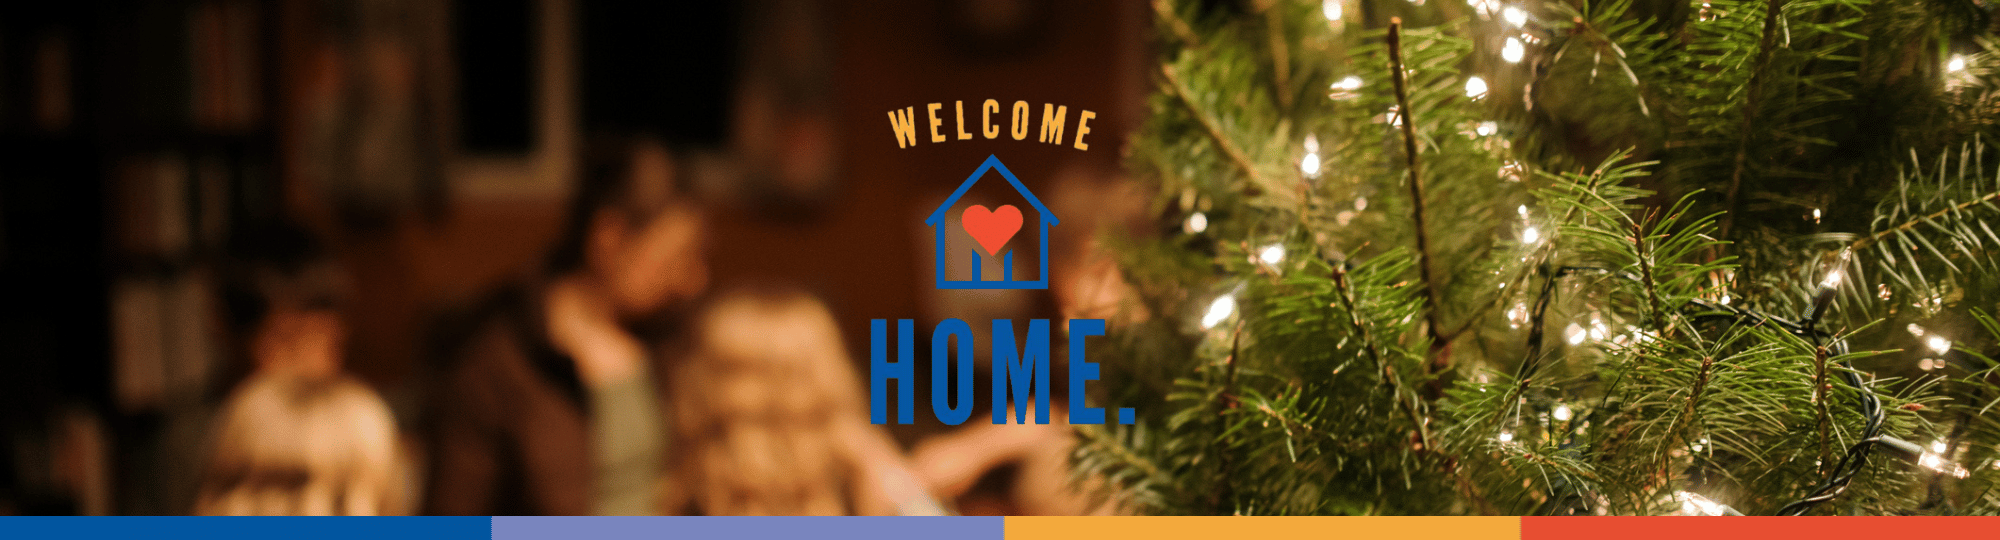 Welcome home kit logo, with an image a family blurred in the background in their home with a lighted pine tree in the foreground to the right